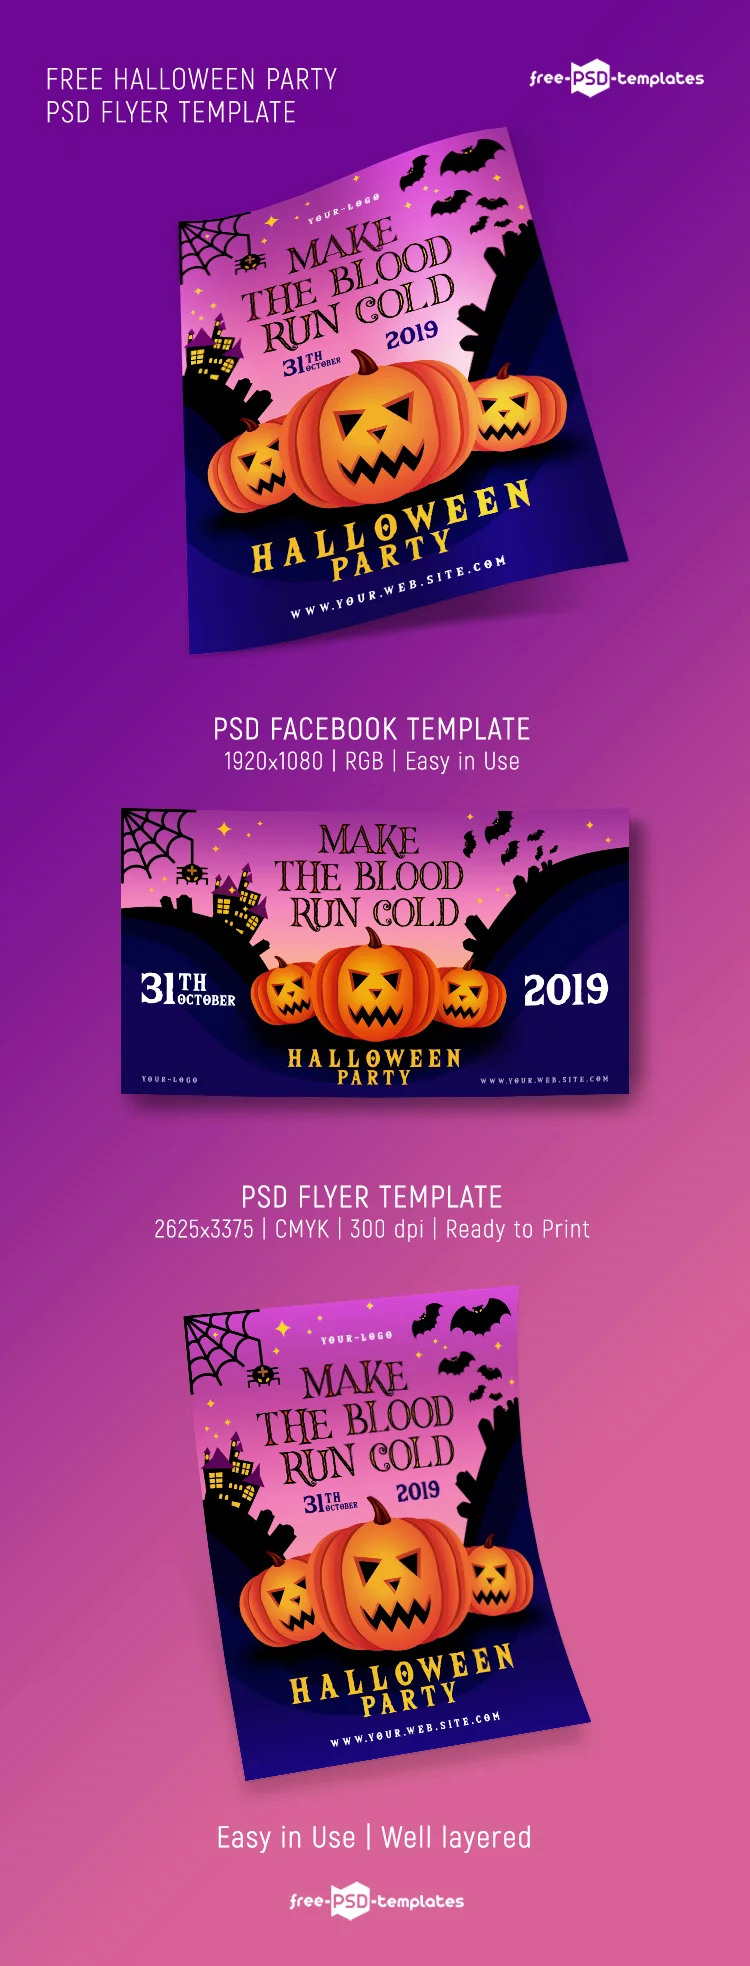 Free Halloween Party PSD Flyer Template